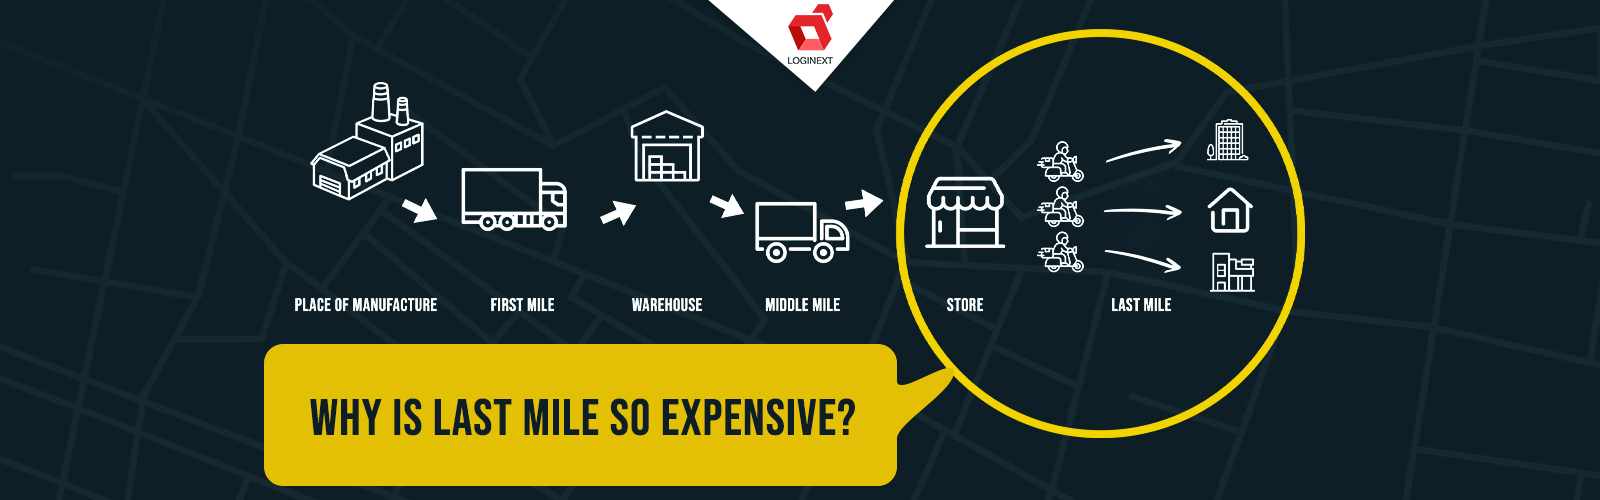 [Infographic] Why is the Last Mile So Expensive?